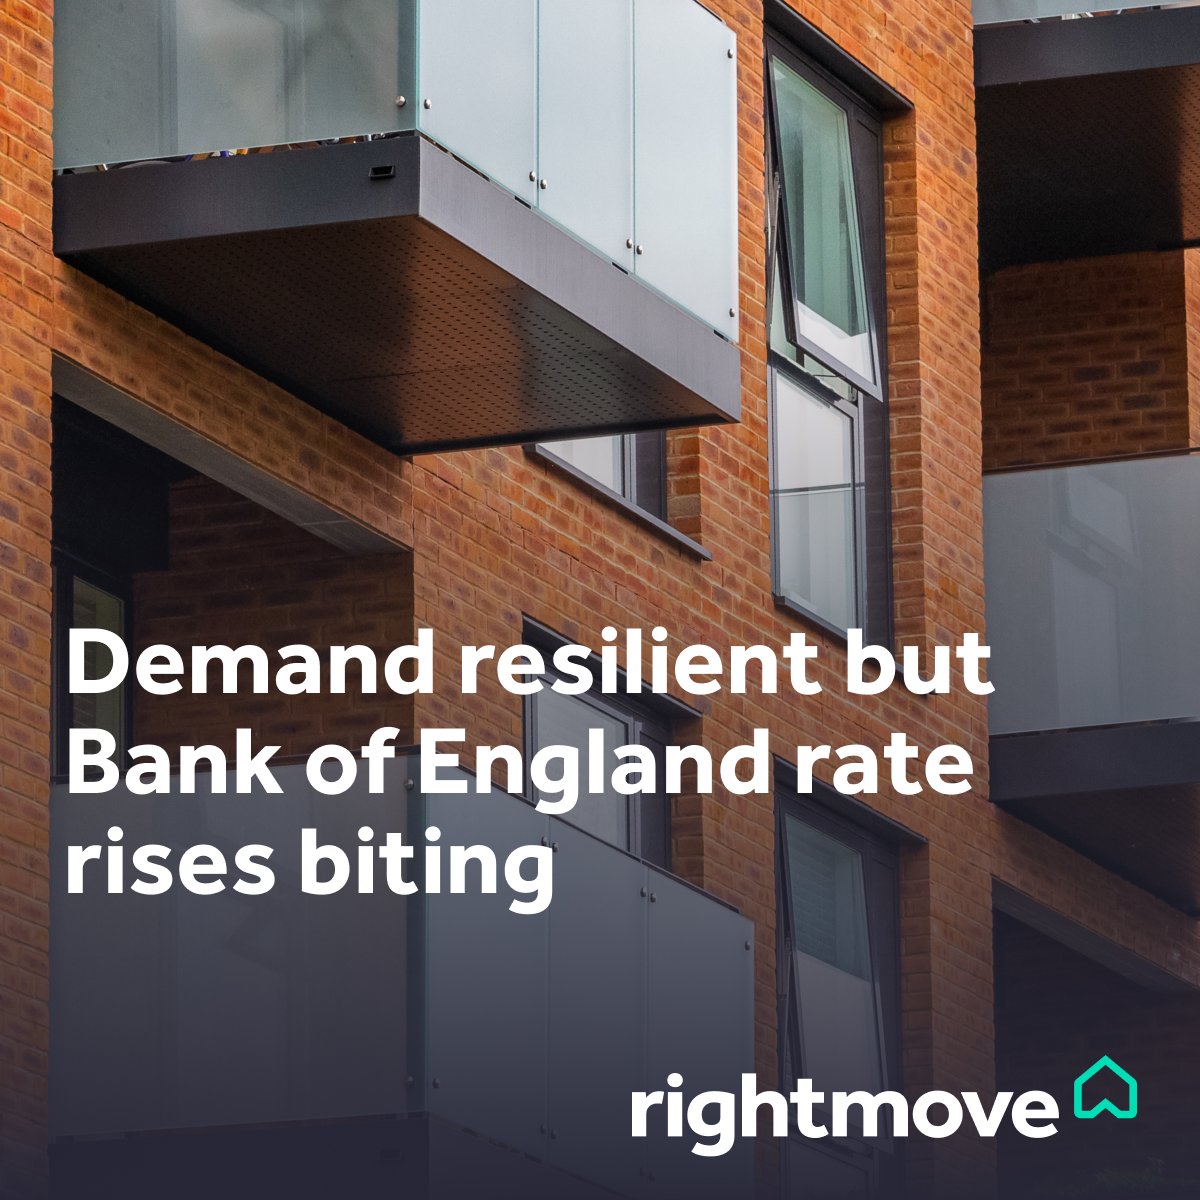 Asking prices have fallen marginally this month as Base Rate rises impact the number of sales agreed. However, buyer demand is still higher than 2019's more normal market level. Read more here 👉 bit.ly/2LTav4i